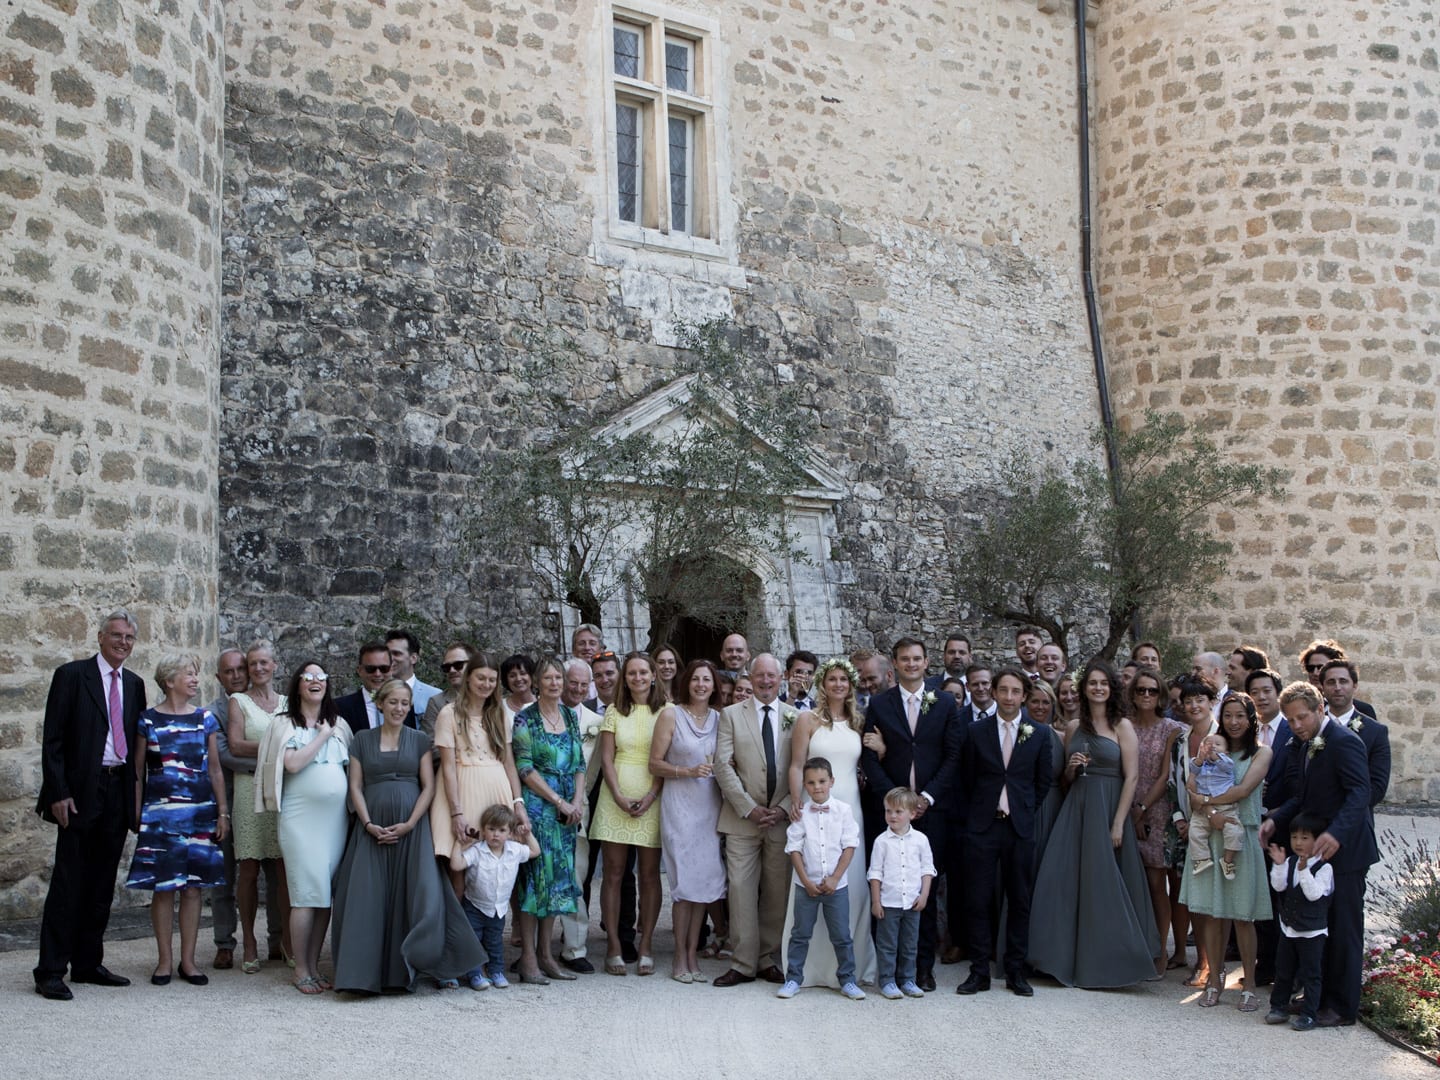 The whole wedding party outside the chateau